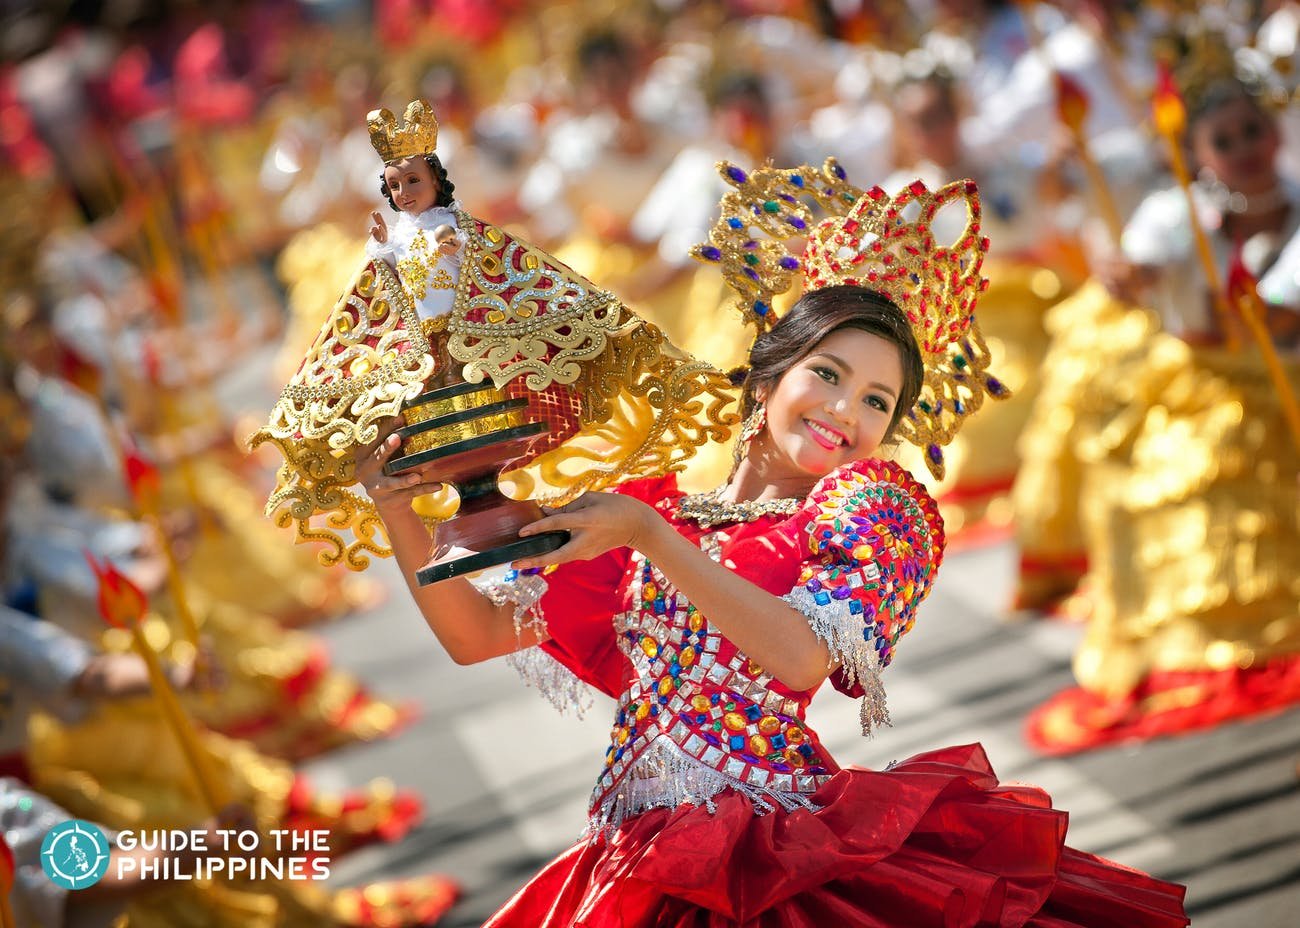 What Is The Grandest Festival In The Philippines